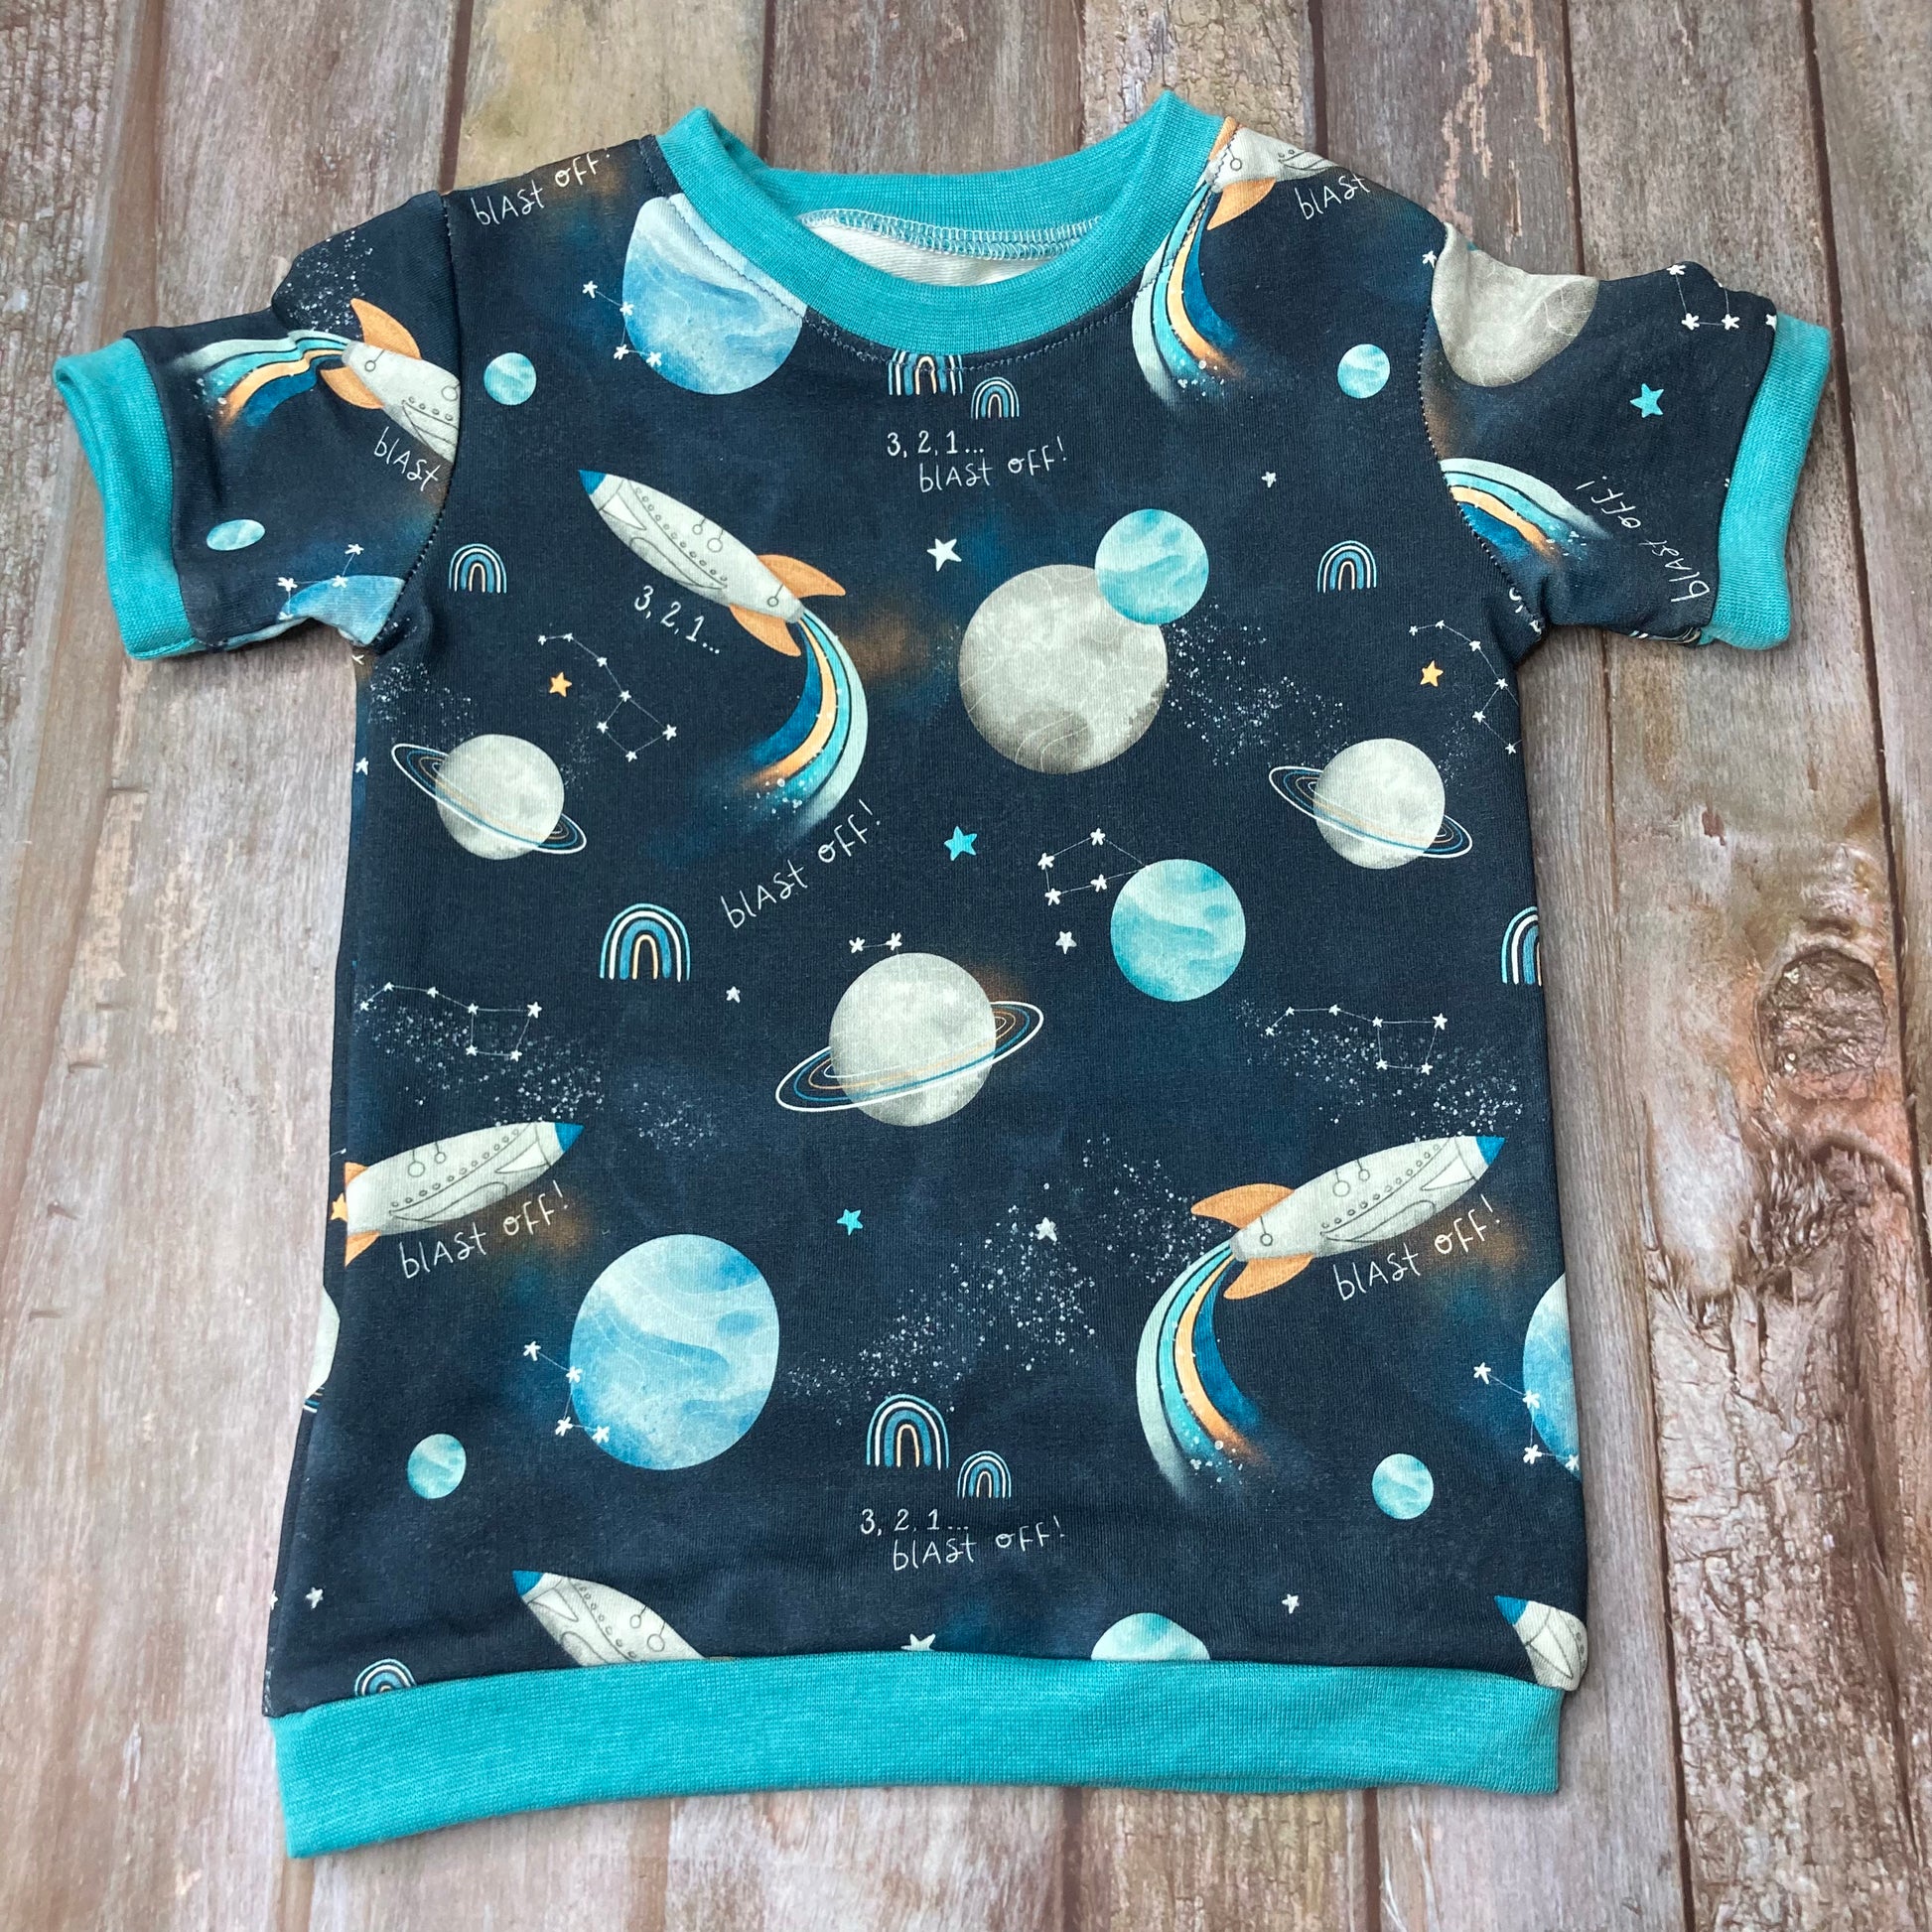 Kids Cuffed T-shirt cotton French terry - Space Rocket Blue - age 1-4 - Uphouse Crafts